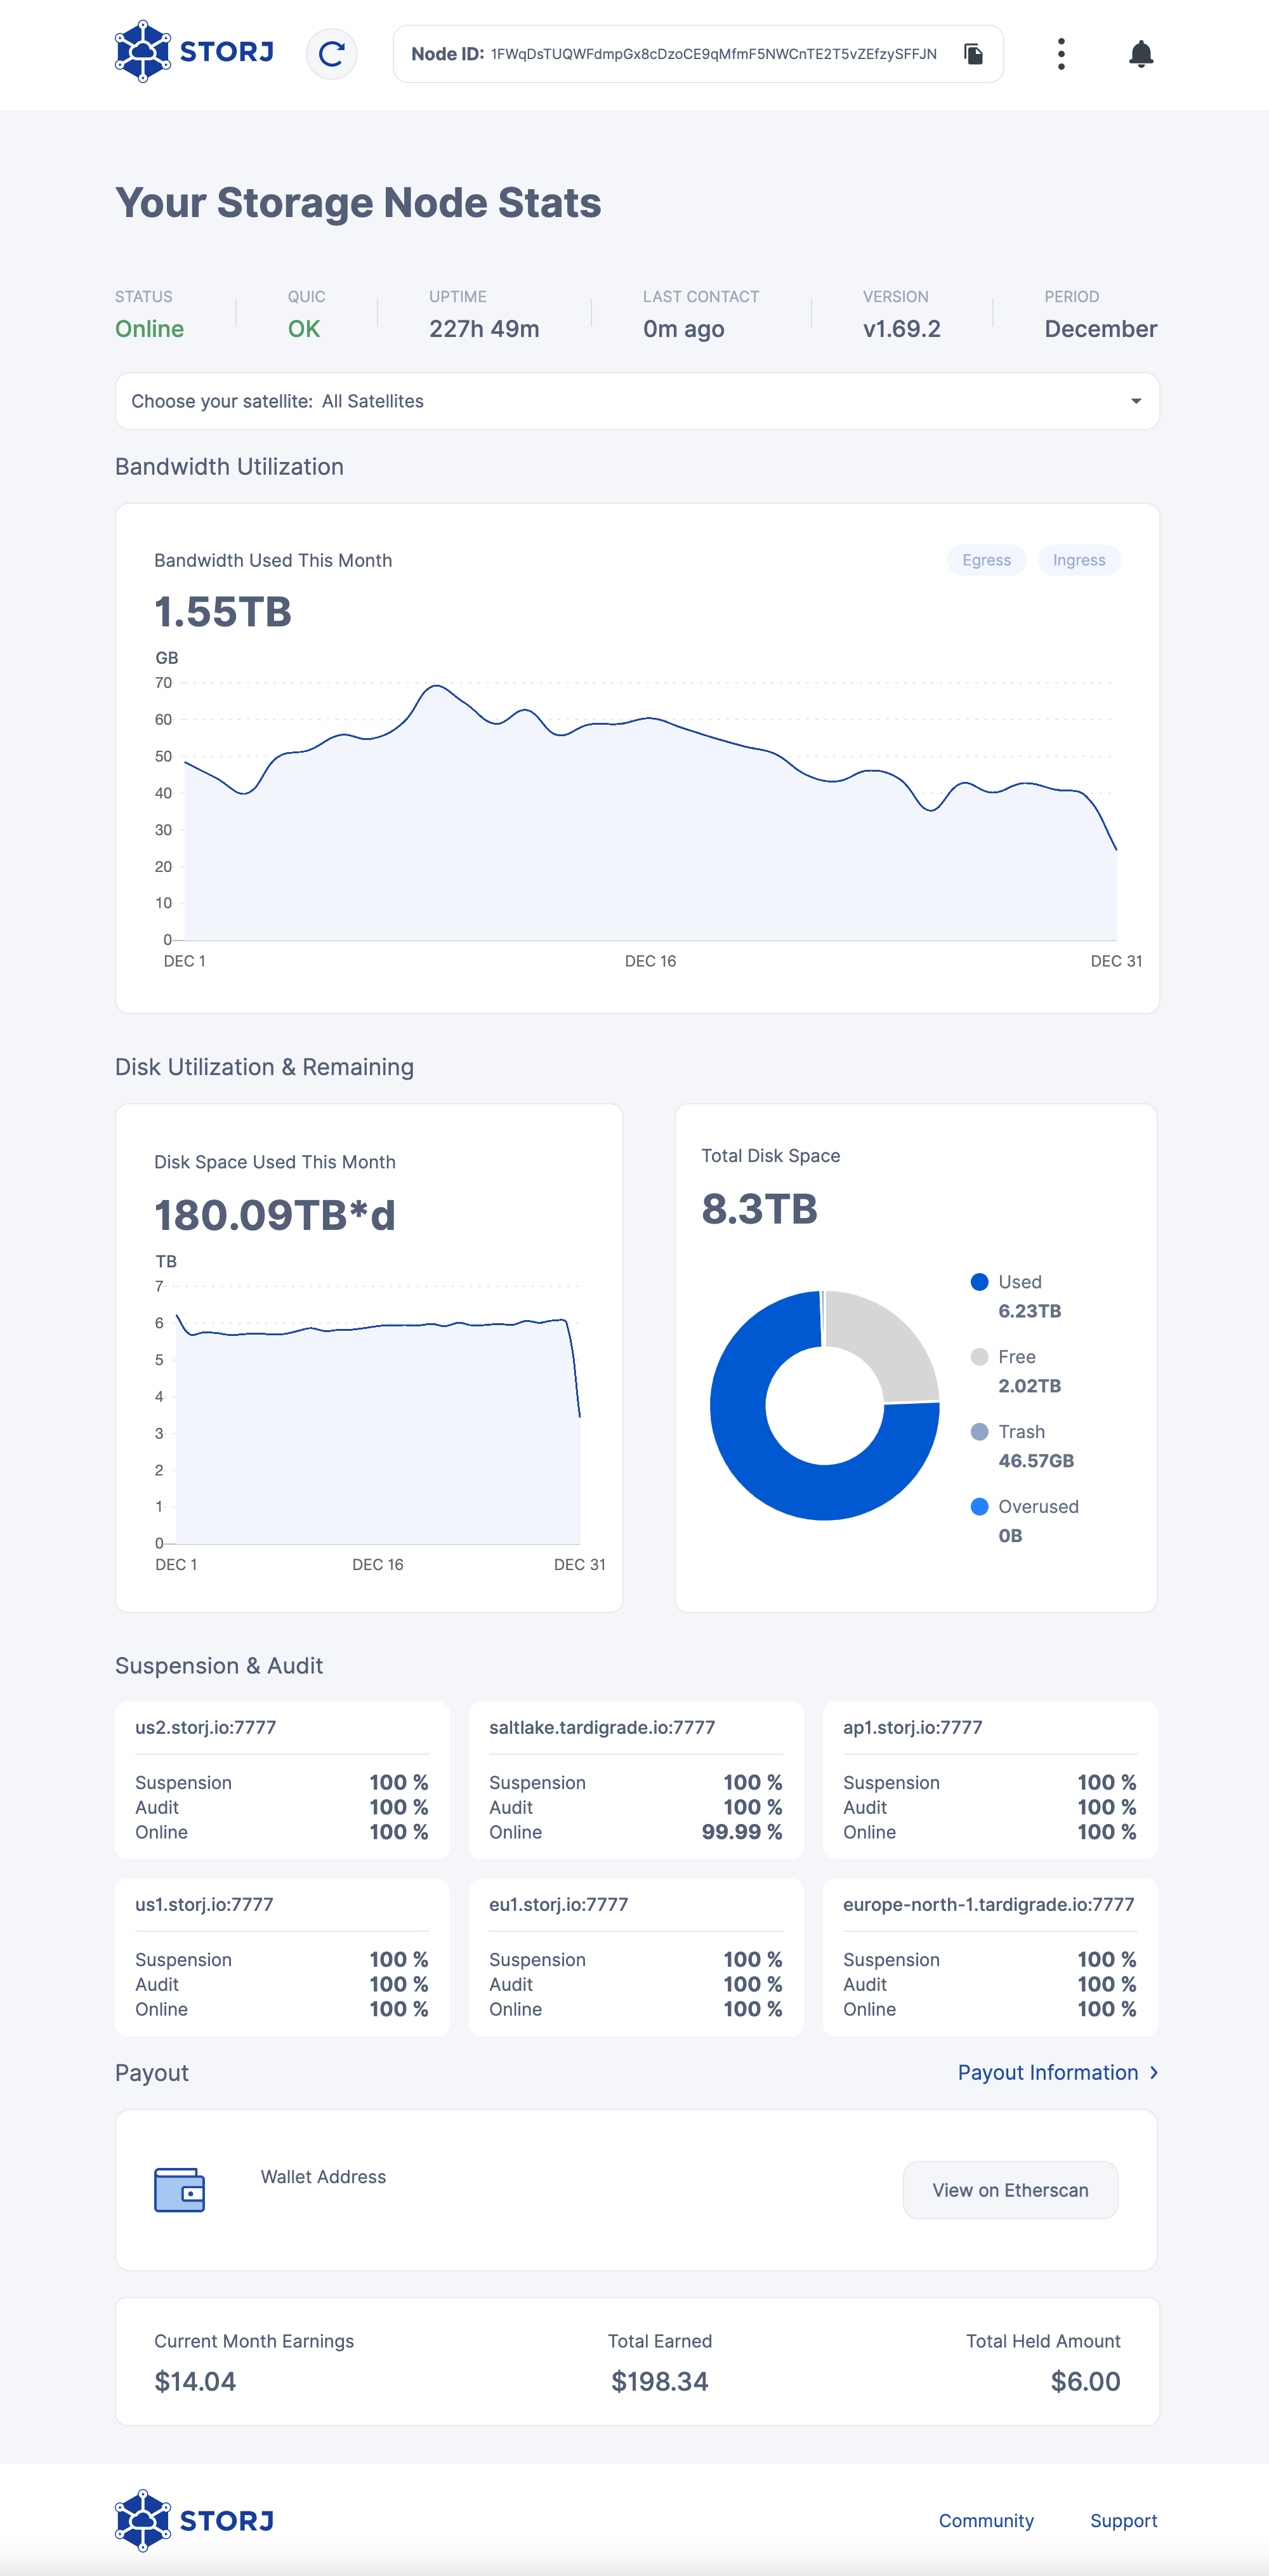 Storj Dashboard end of December 2022. Bandwidth used: 1.55 TB. Hours of storage used: 180.09 TB*h. Total available storage: 8.3 TB. Used storage: 6.23 TB. Free disk space: 2.02 TB. Recycle bin: 46.57 GB. Earnings this month: $14.04. Total earnings: $198.34. Withheld earnings: $6.